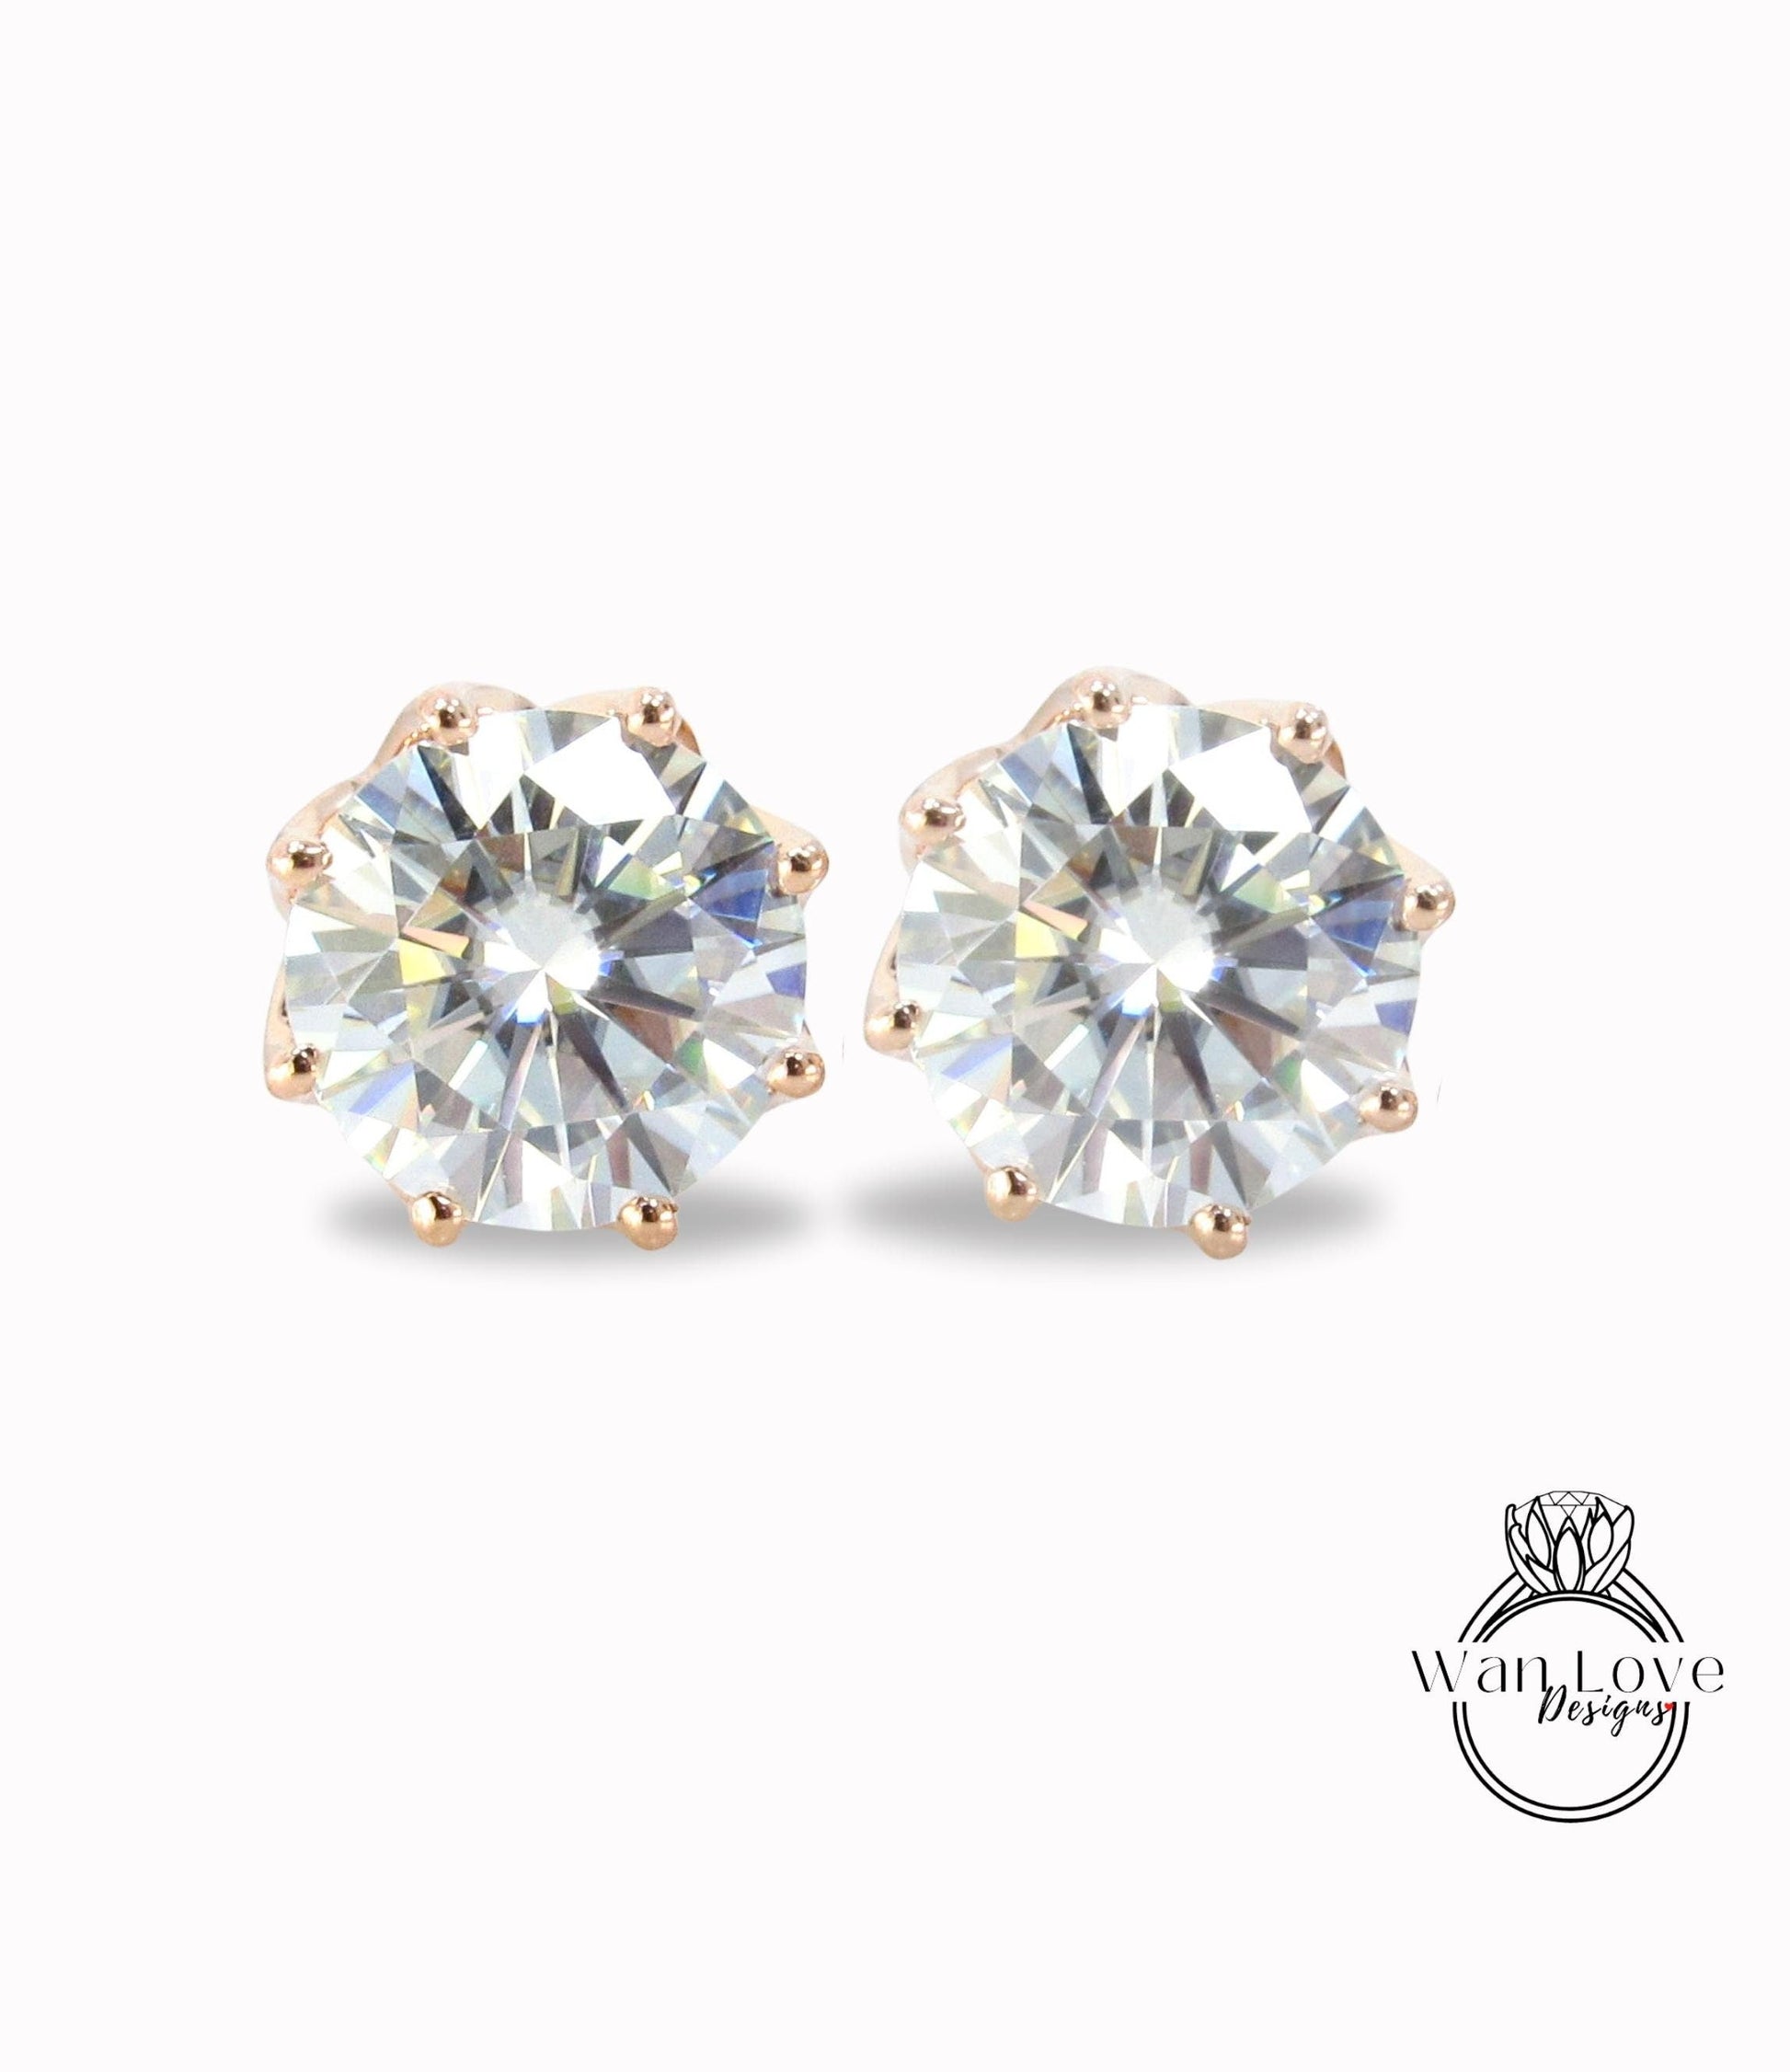 Moissanite Earrings 2ct miossanite studs 8 Prong Screw Back moissanite earrings Rose Gold moissanite earrings Anniversary Gift for her Ready Wan Love Designs